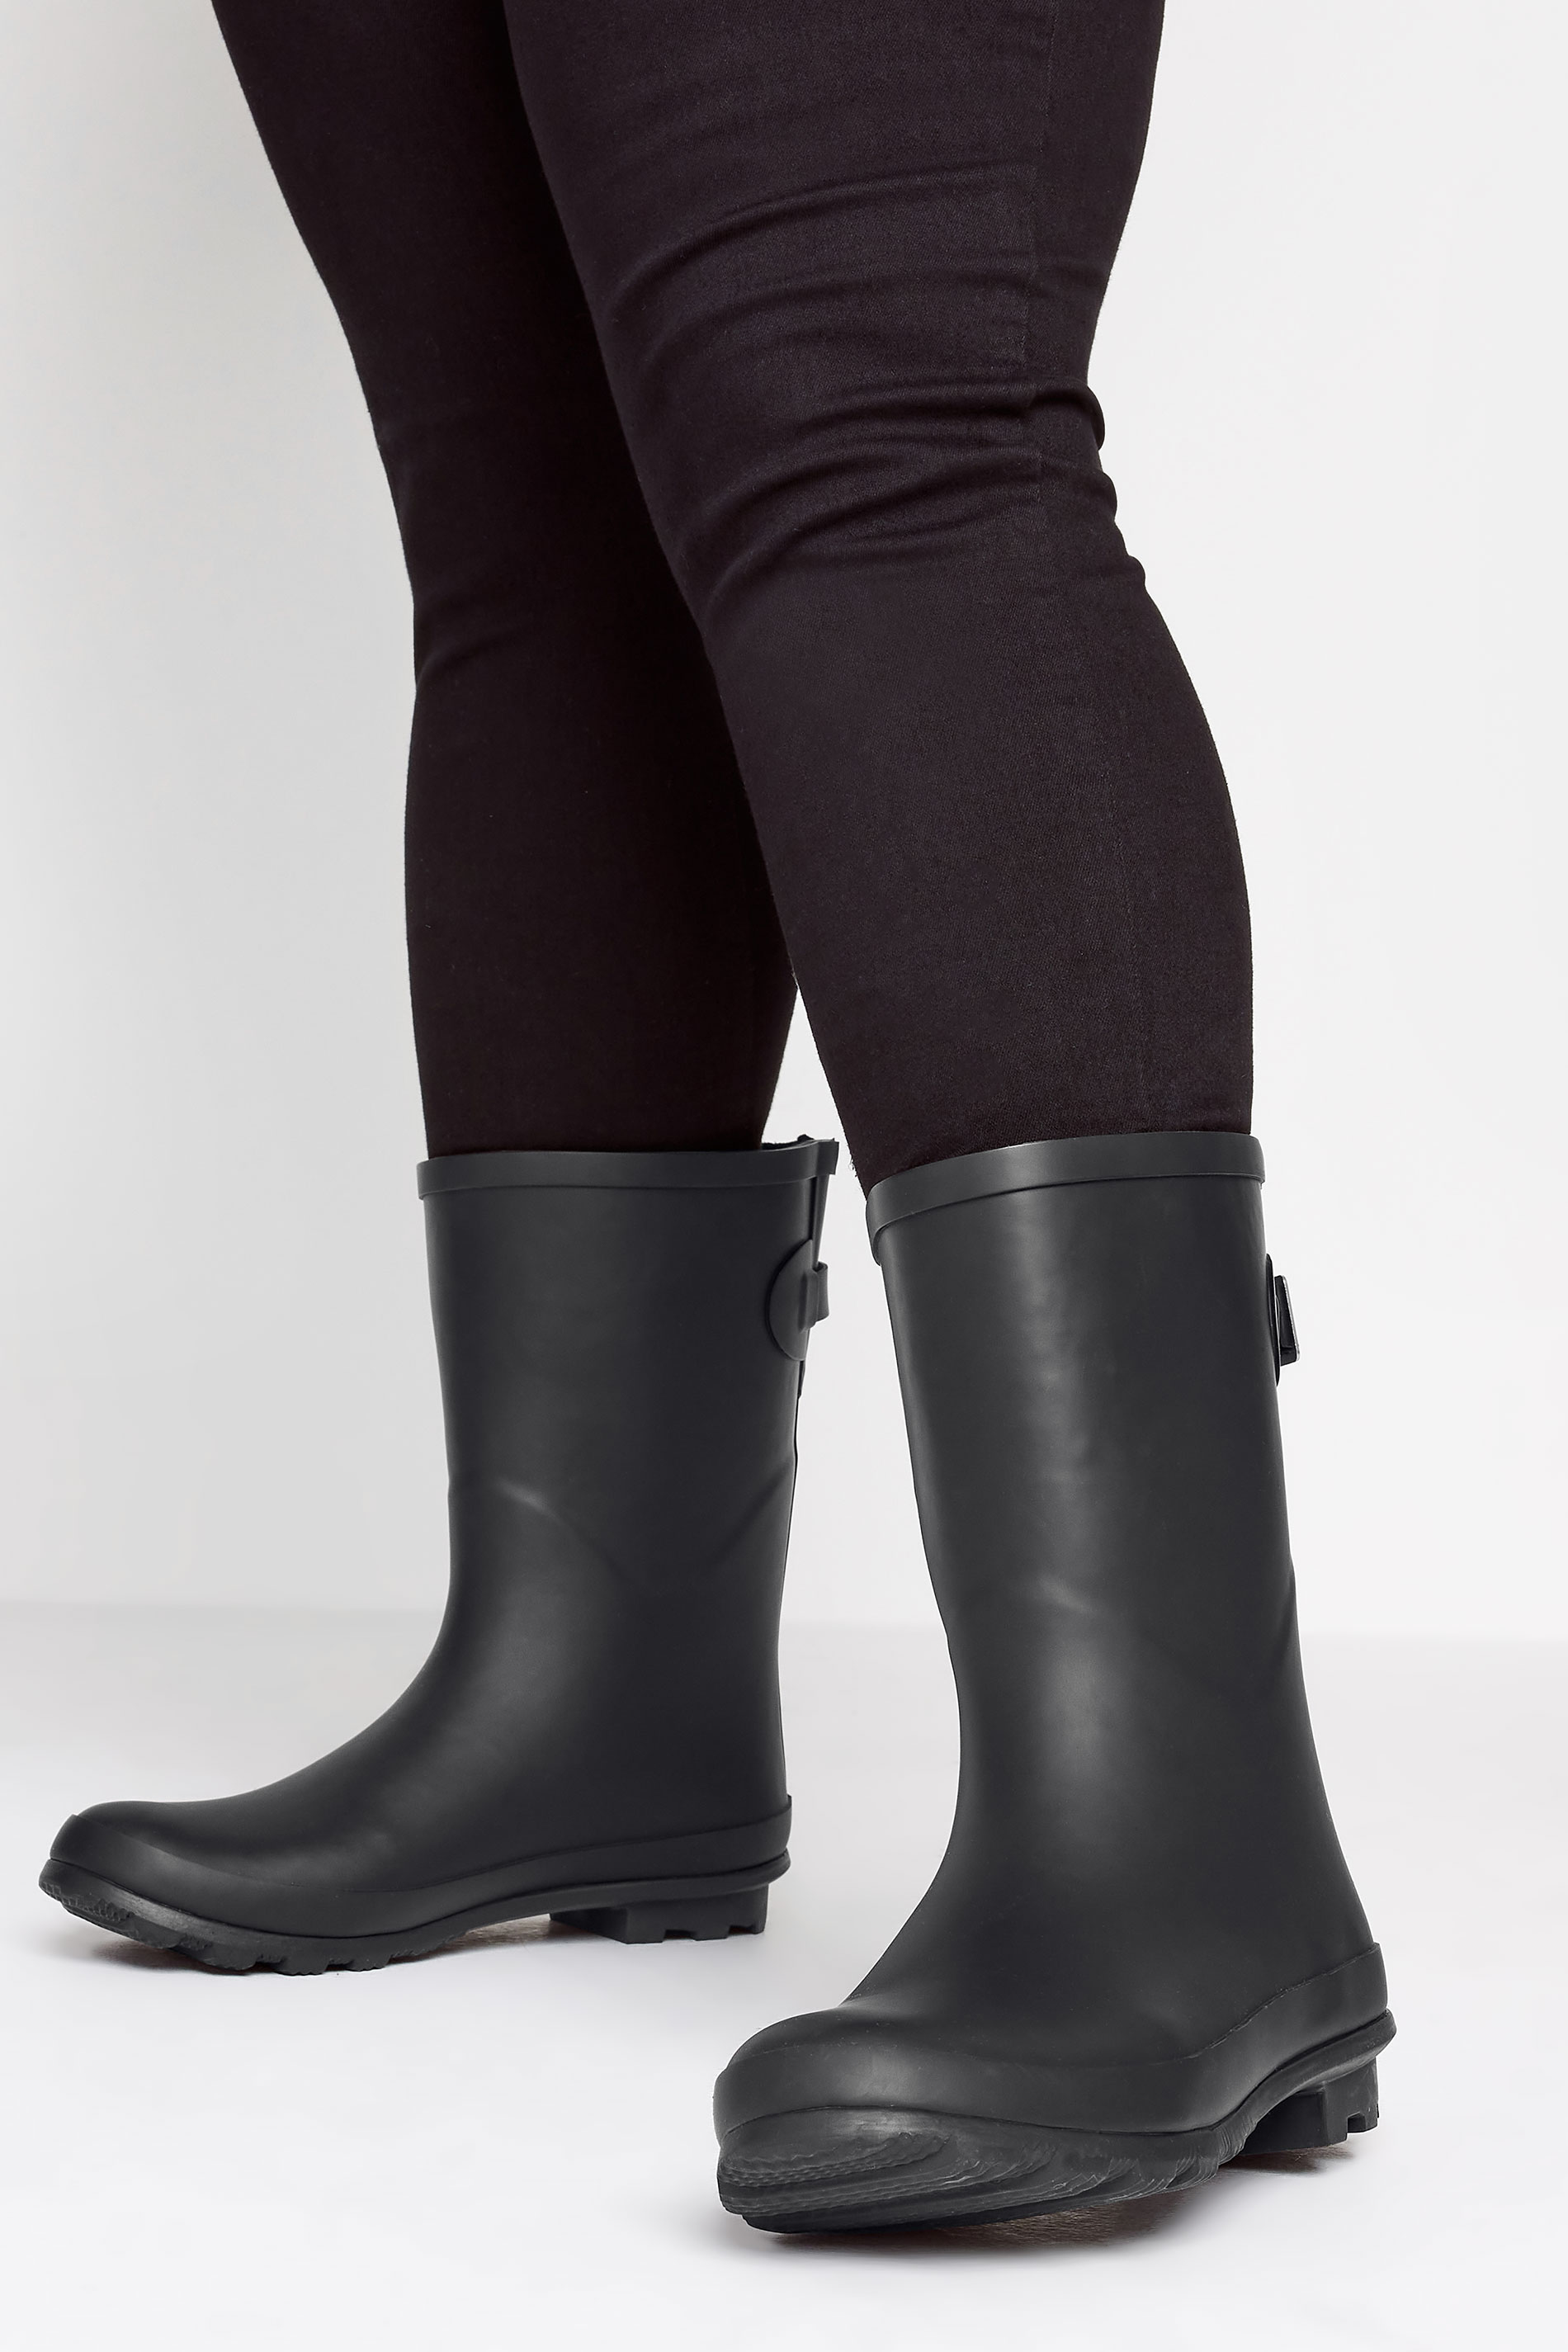 Black Mid Calf Wellies In Wide E Fit | Yours Clothing 1